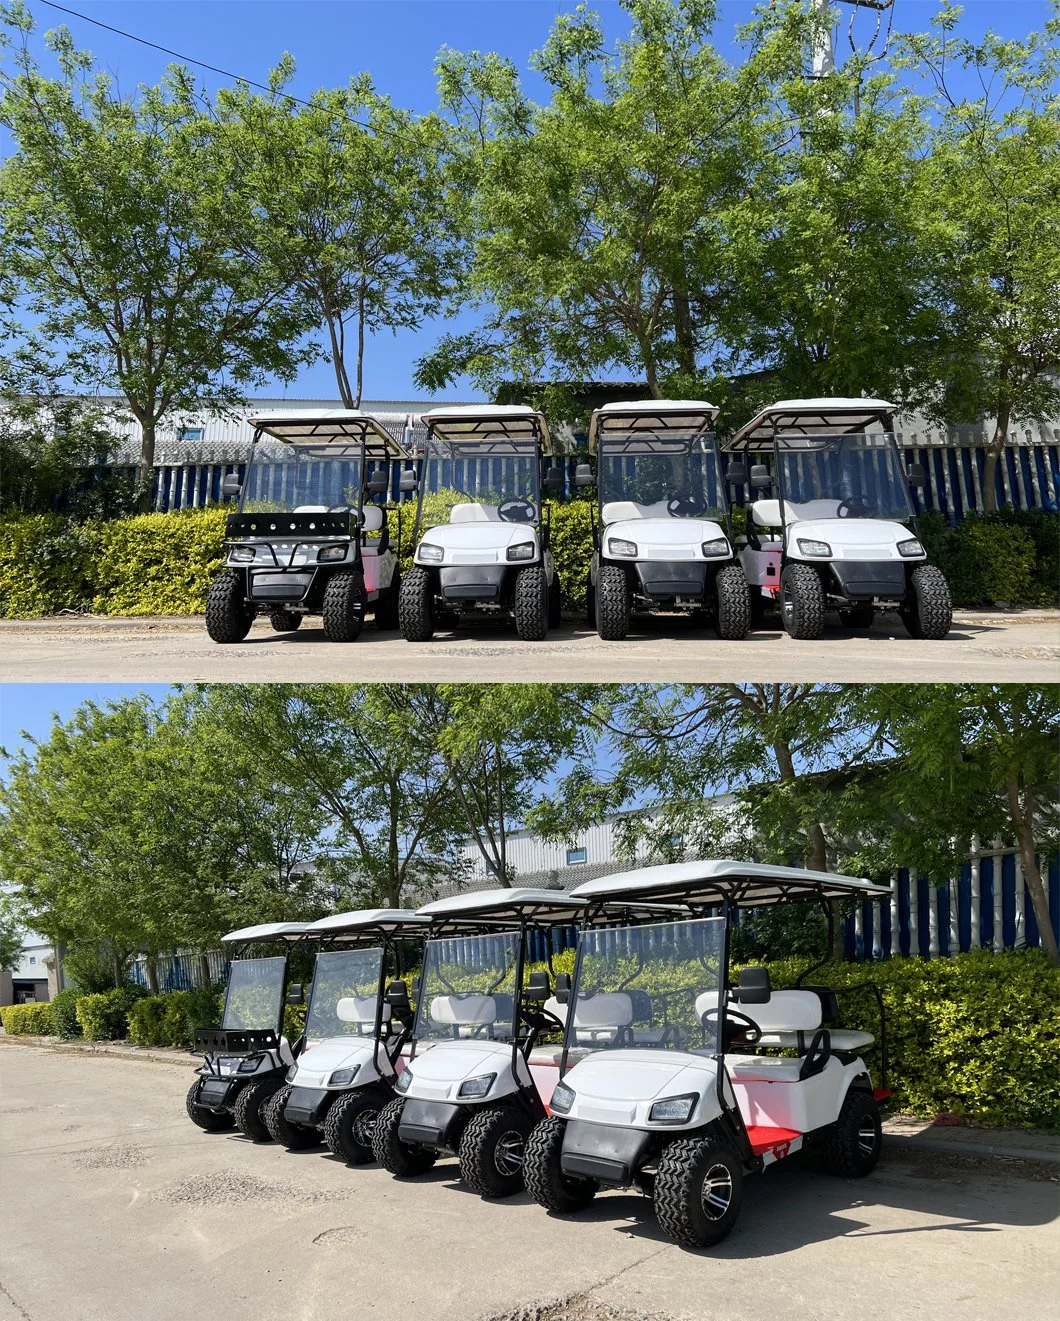 New 6 Seats M4+2 M6 China Factory Custom Club Hunting Car Battery Operated Golf Carts Electric Golf Buggy